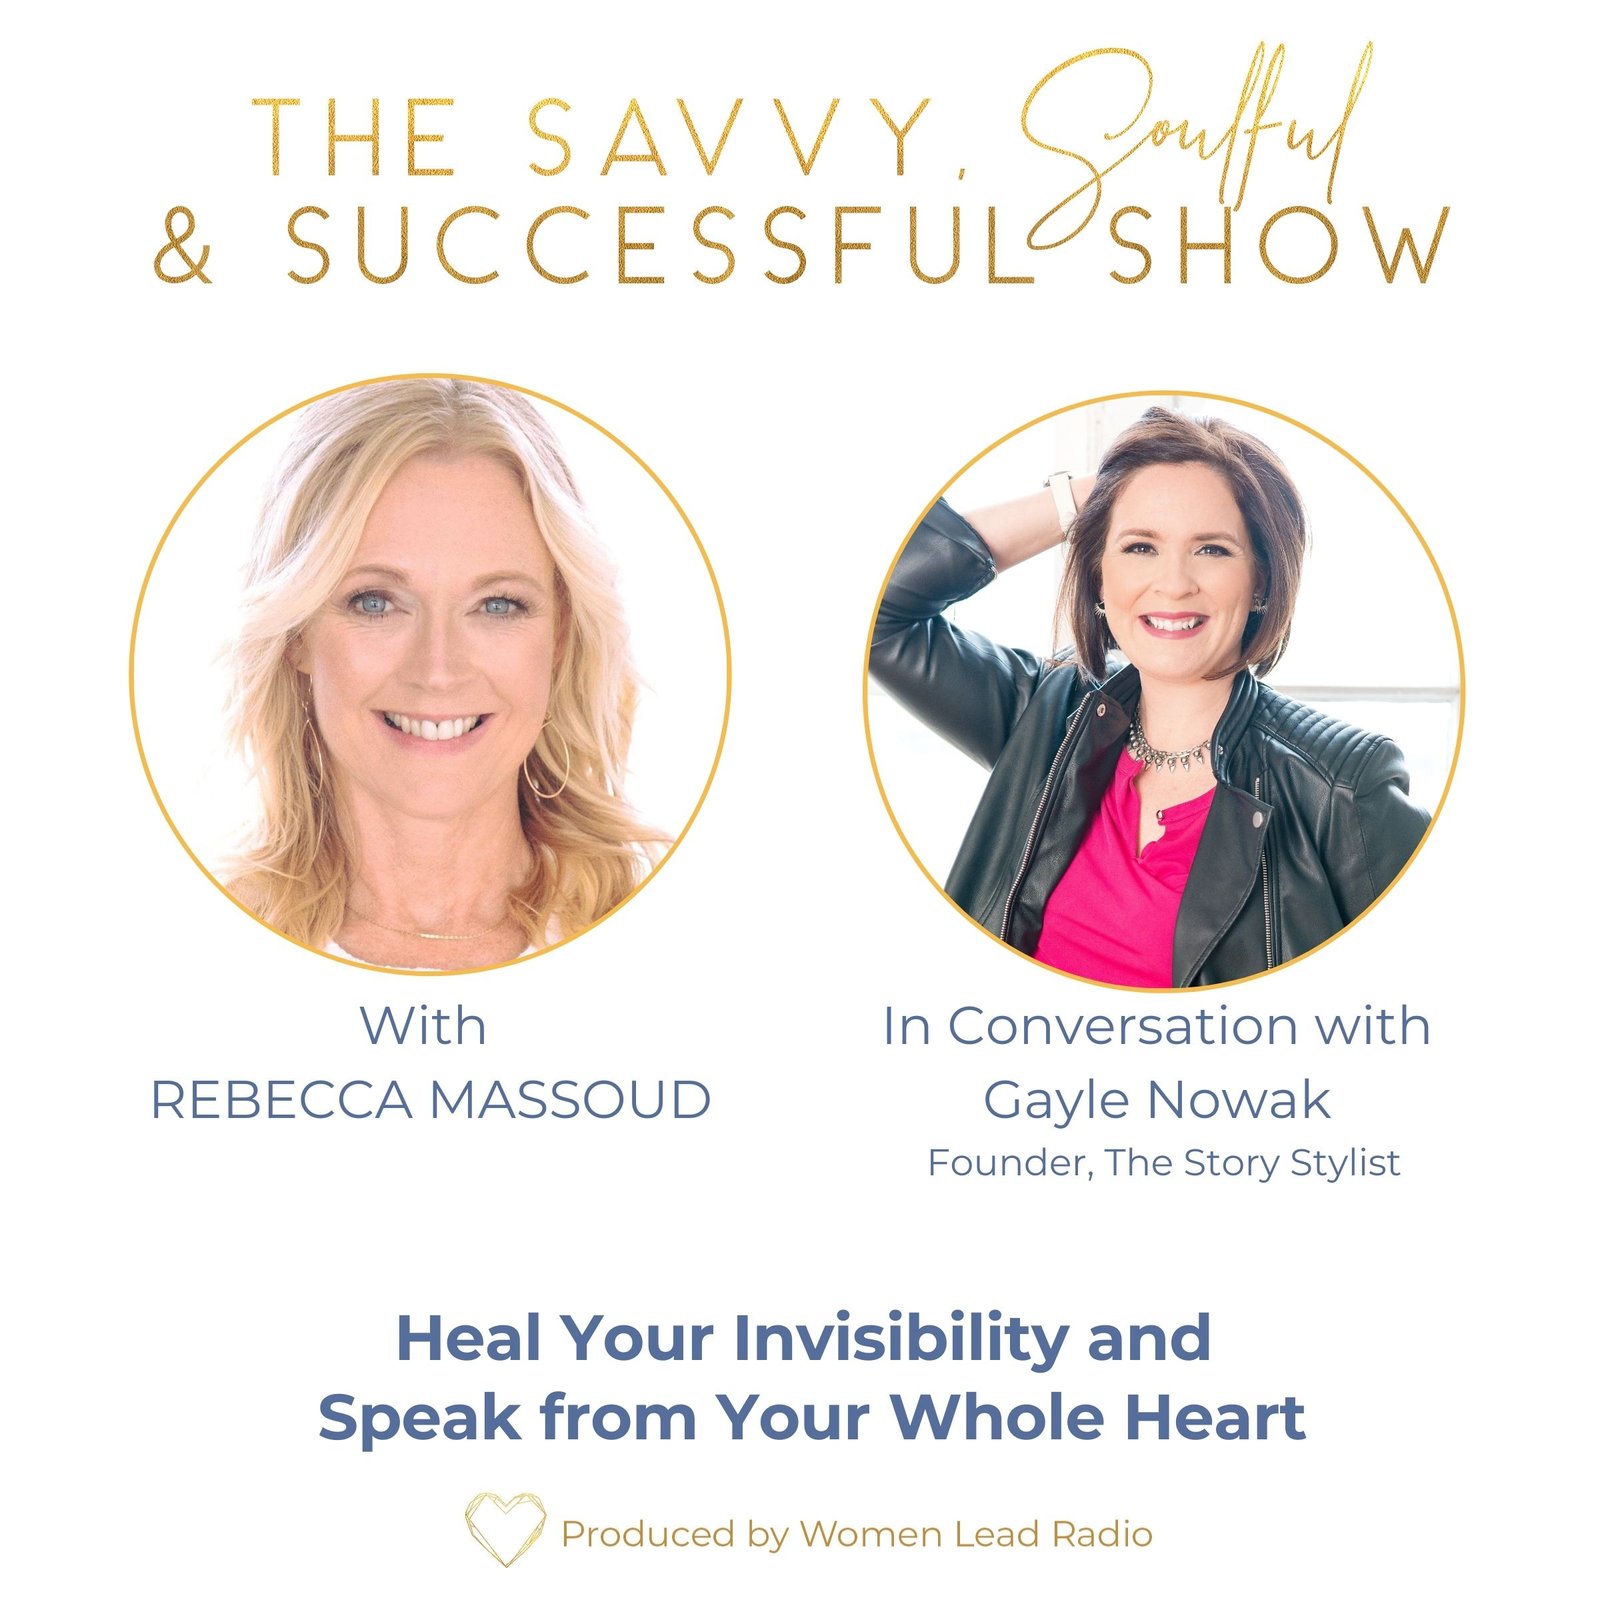 Rebecca Massoud’s “The Savvy, Soulful & Successful Show” Featured Guest Gayle Nowak to Discuss Topic of Visibility Fears